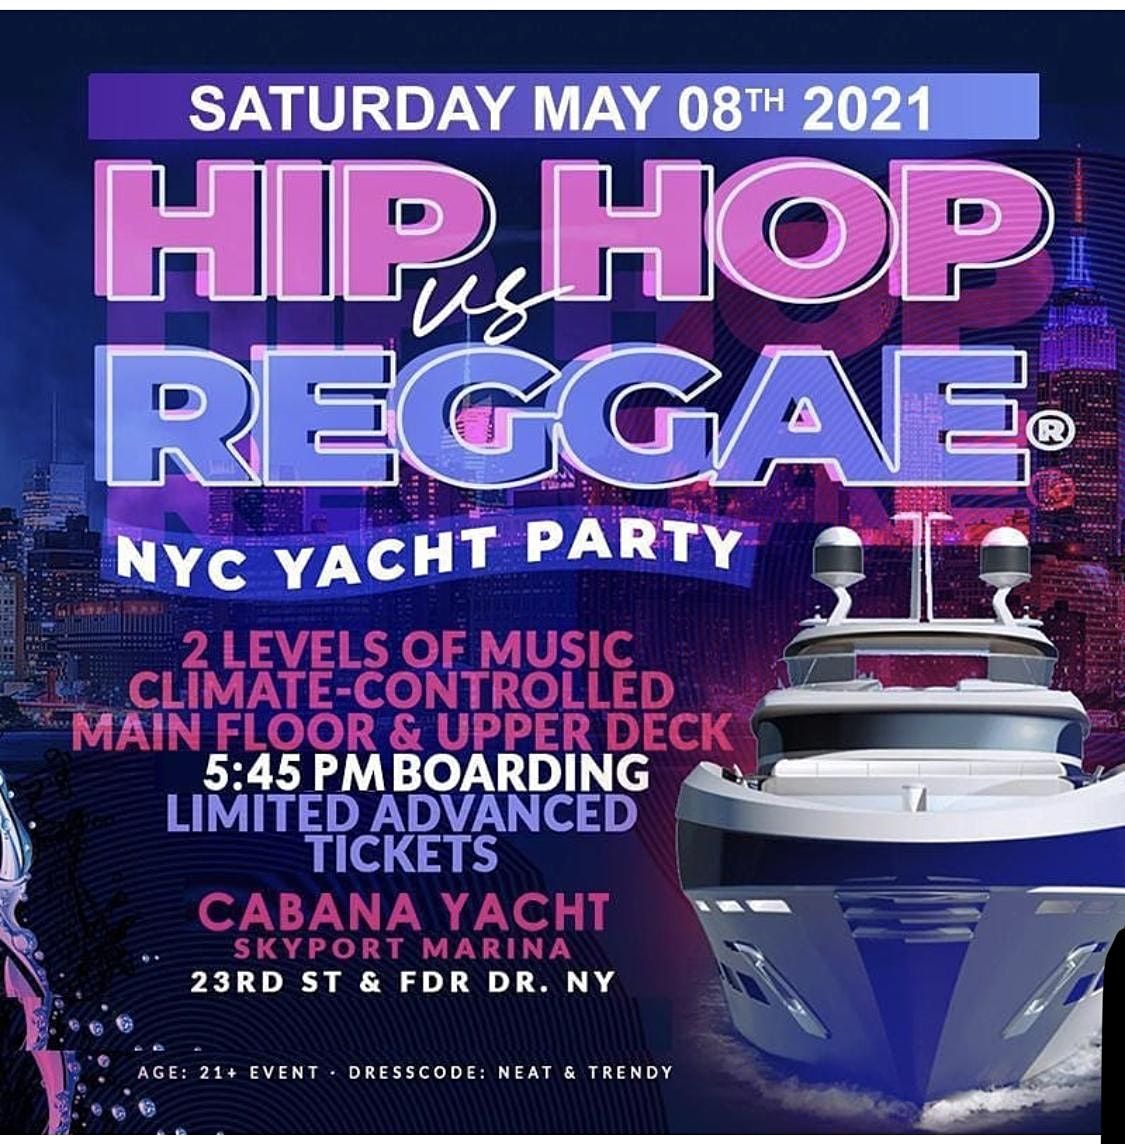 MIDNIGHT YACHT PARTY NYC! Sat., July 31st